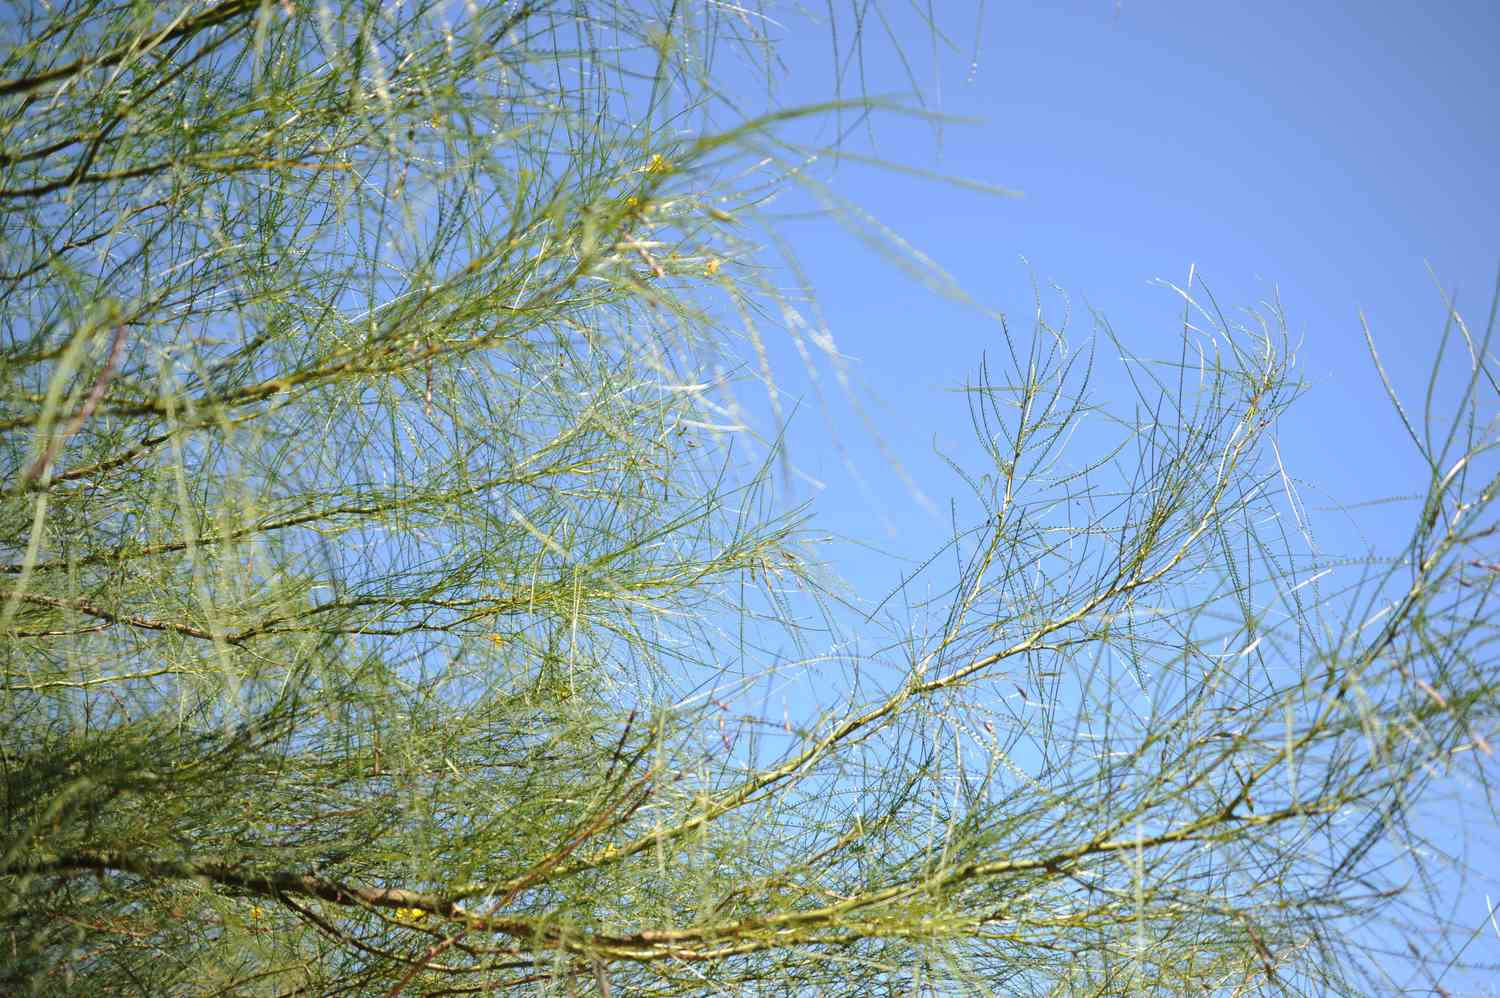 Palo verde tree branches with long and thin pinnate branches against blue sky